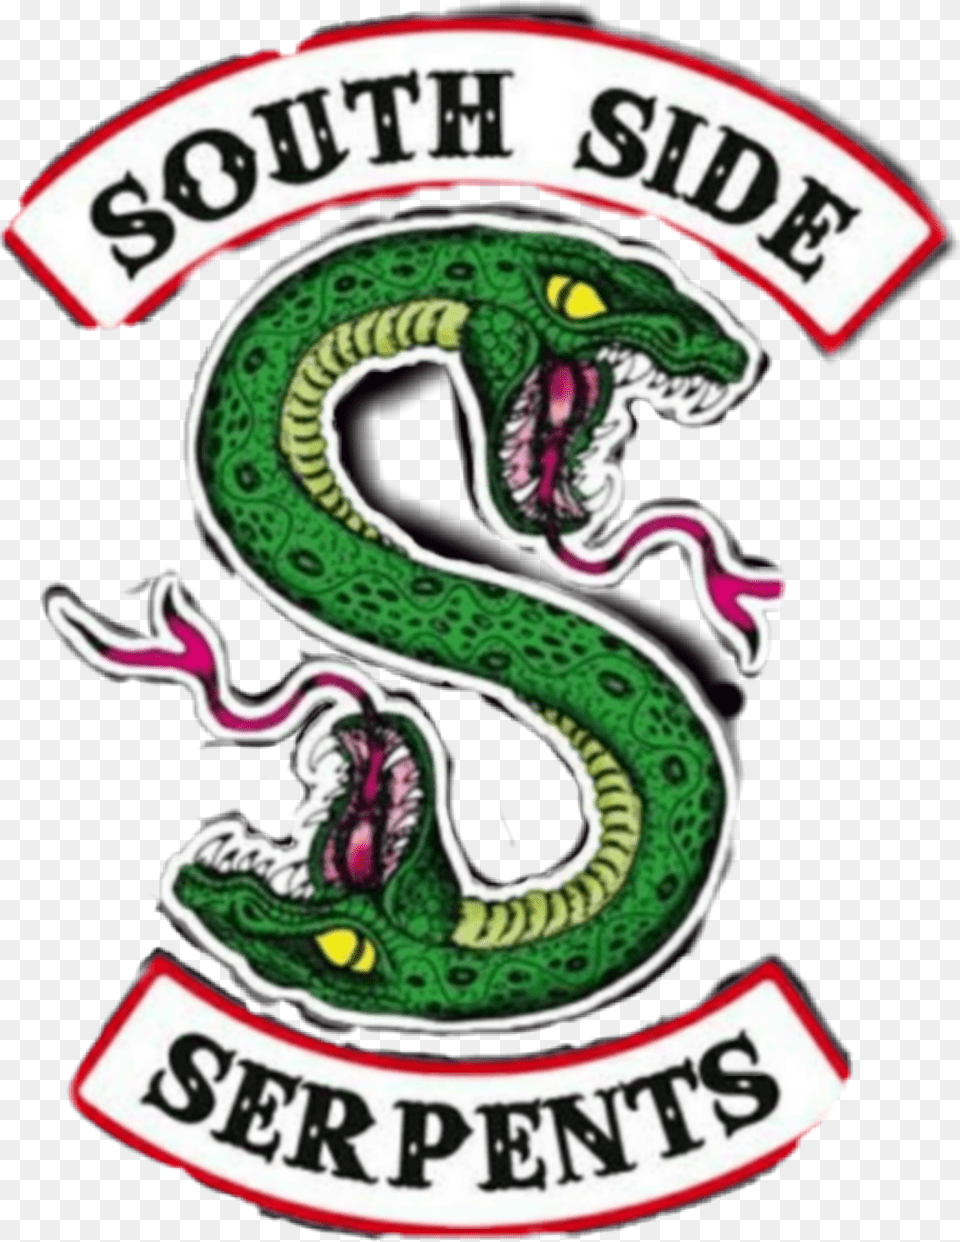 Southsideserpents Southsideserpent Riverdale Serpent Riverdale South Side Serpent Dessin, Logo, Can, Tin Png Image